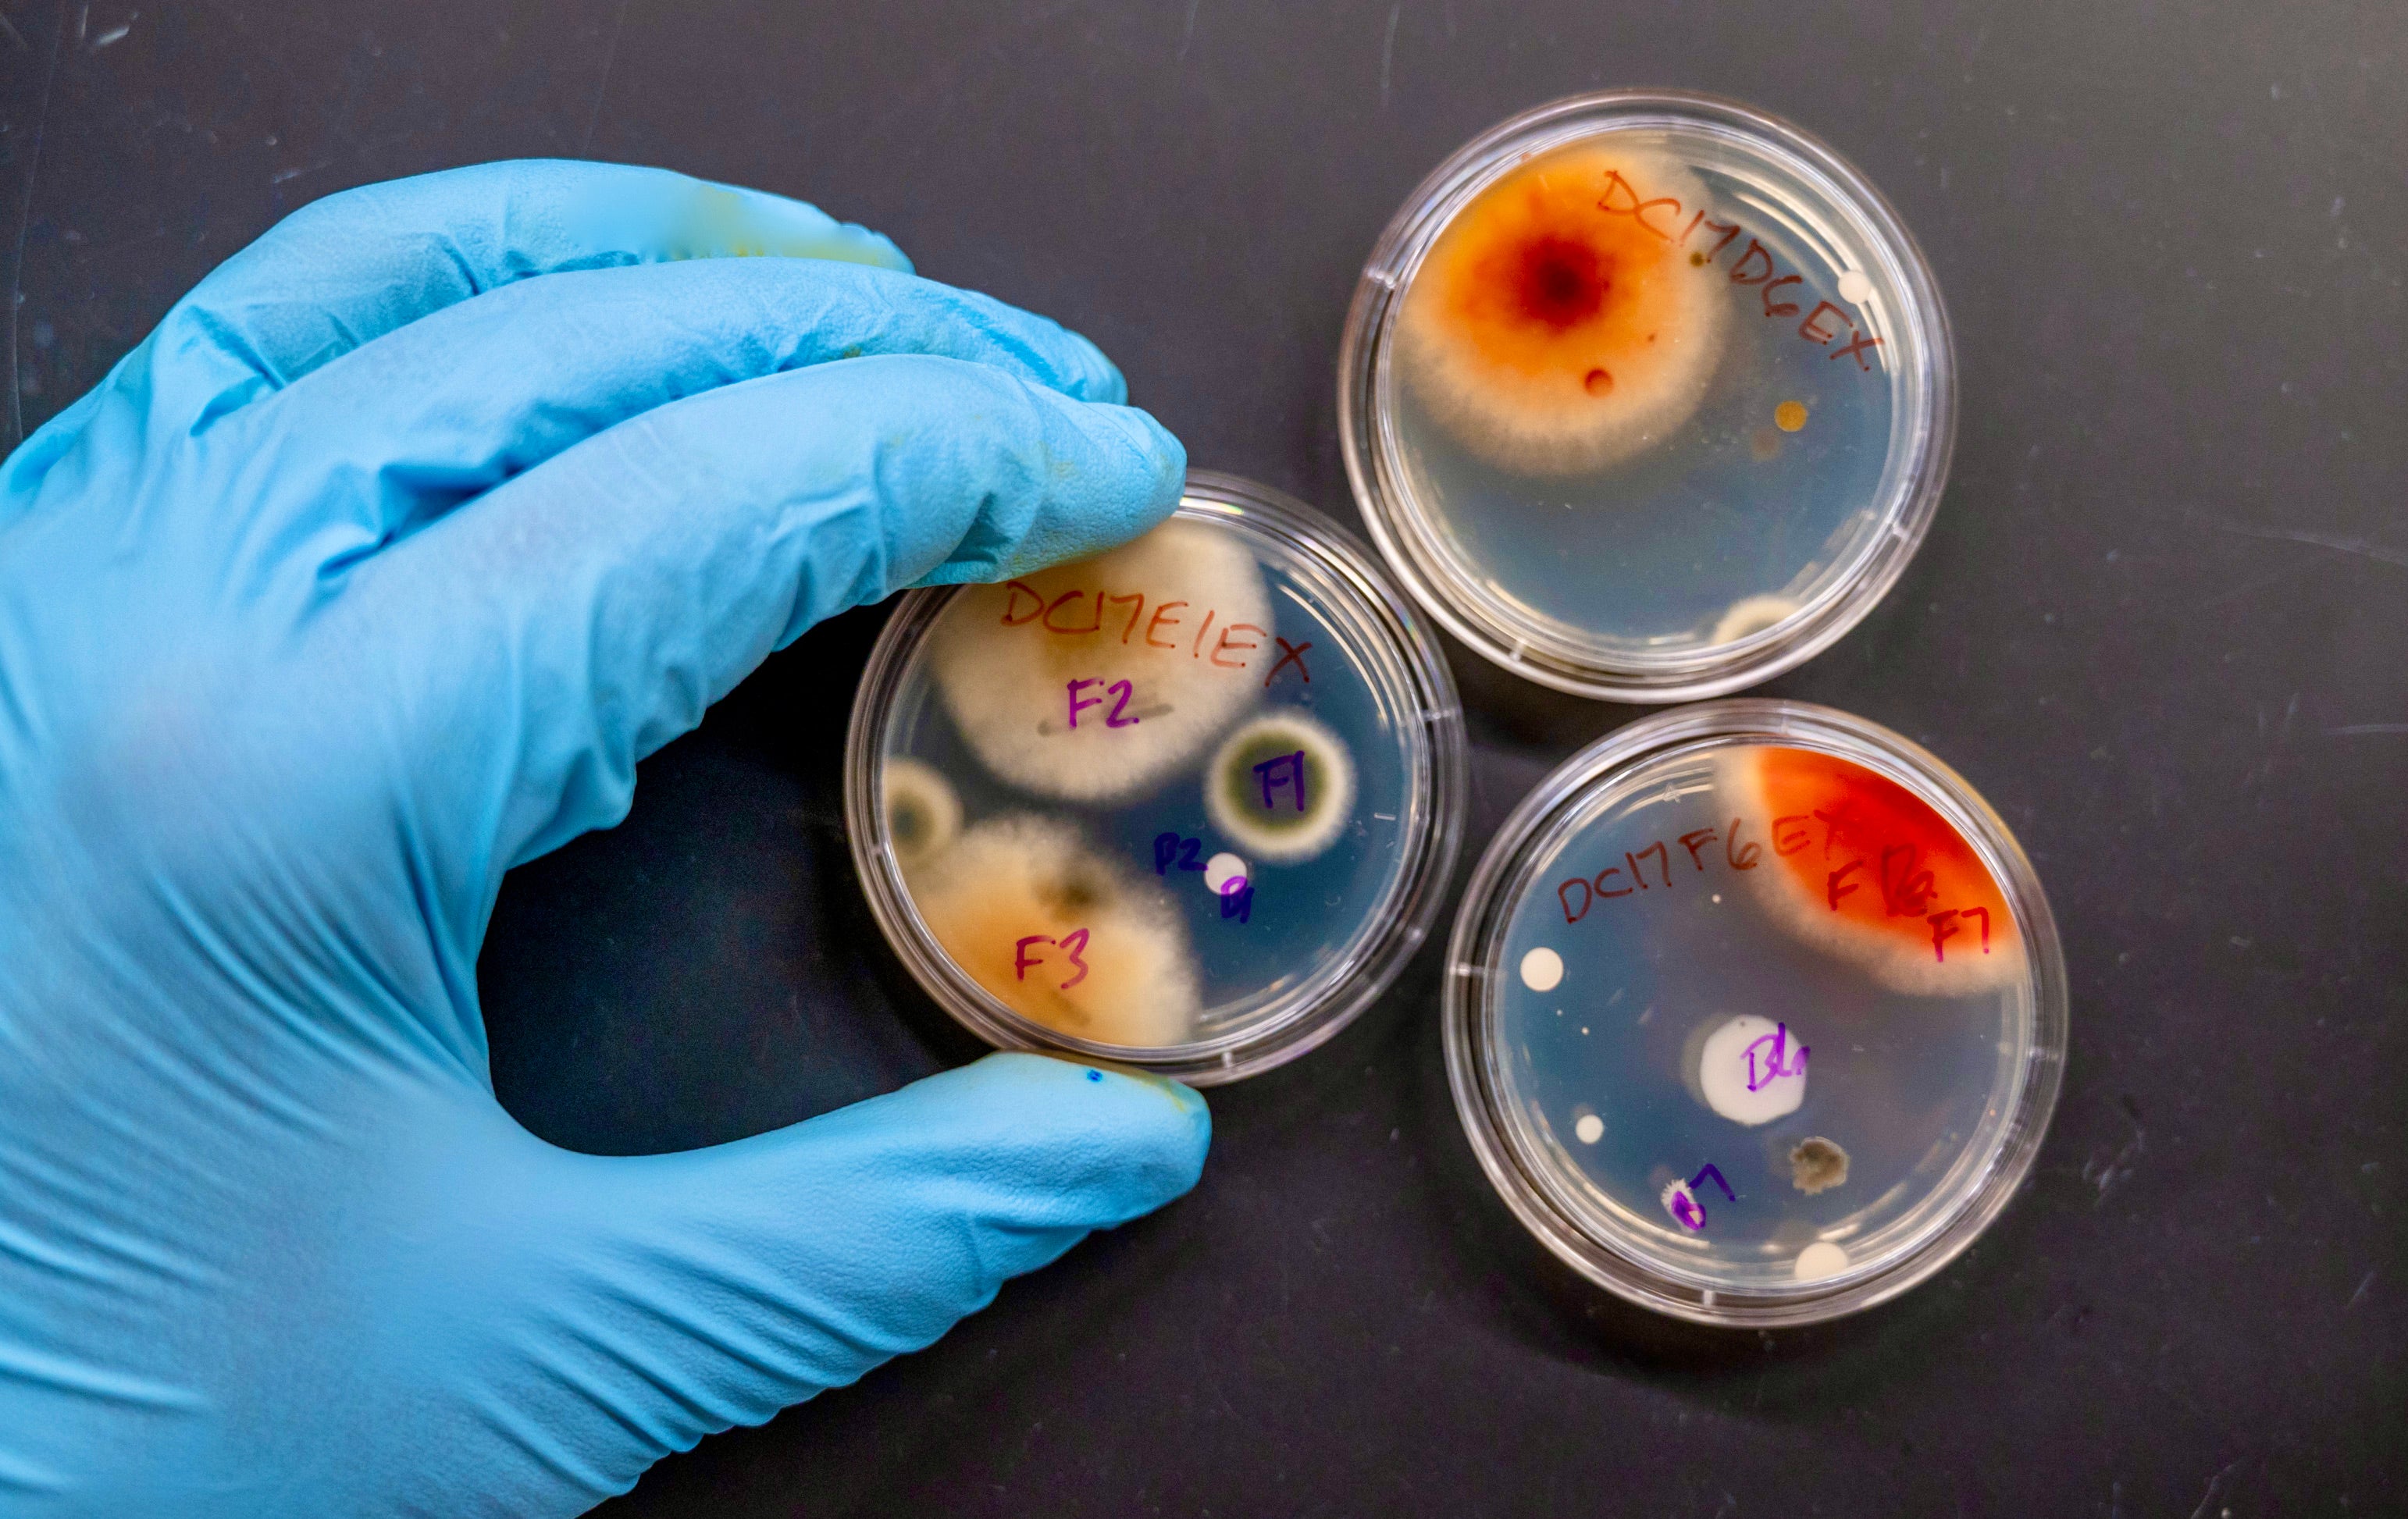 A gloved hand holds specimens in a petri dish